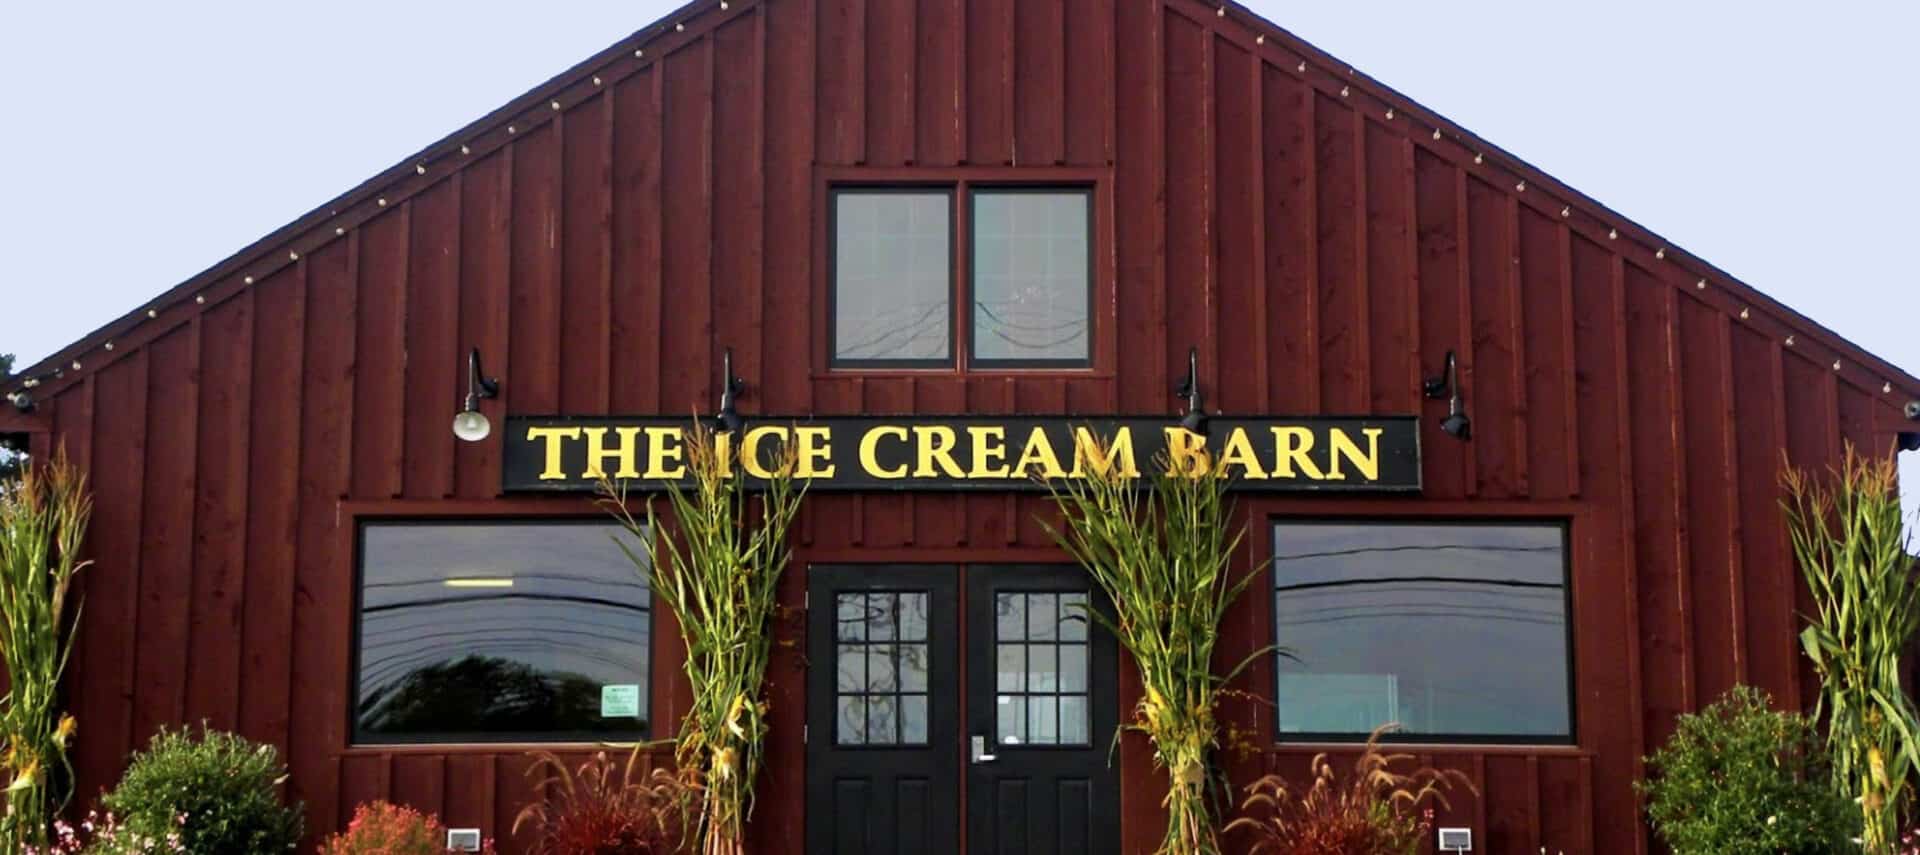 Red barn looking structure with Gold lettering "The Ice Cream Barn".